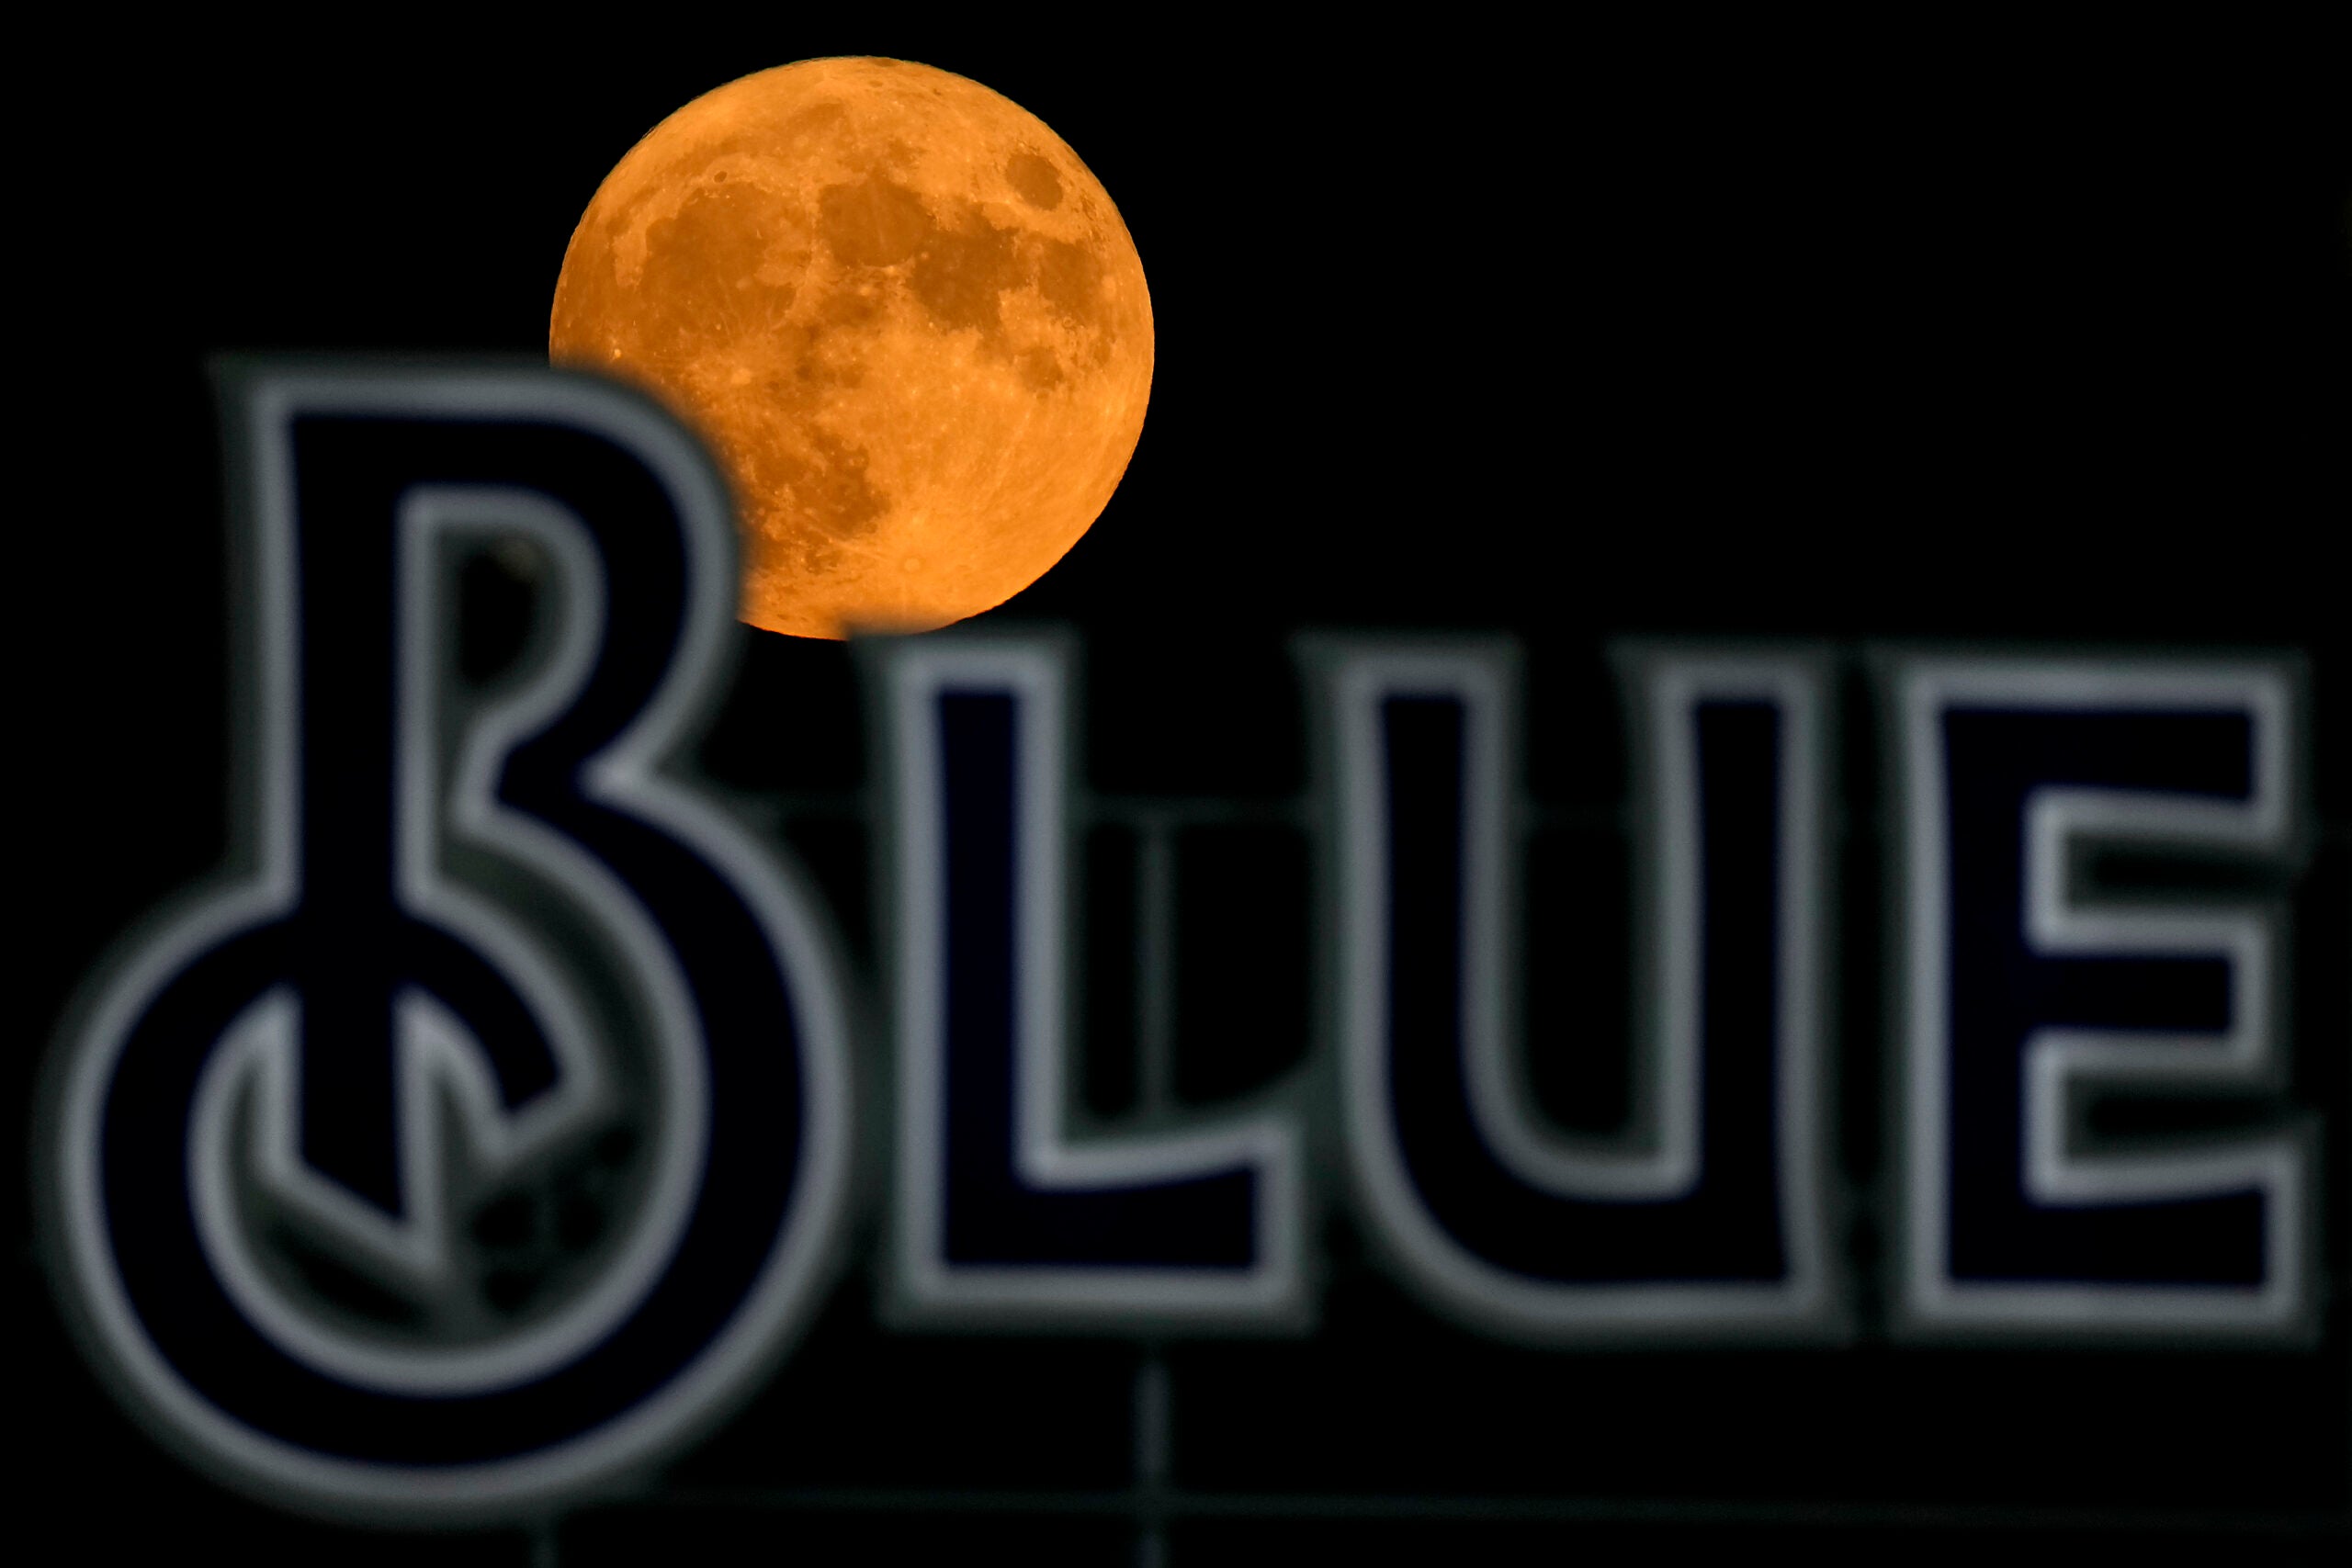 The full moon rises beyond a sign in the outfield during a baseball game.